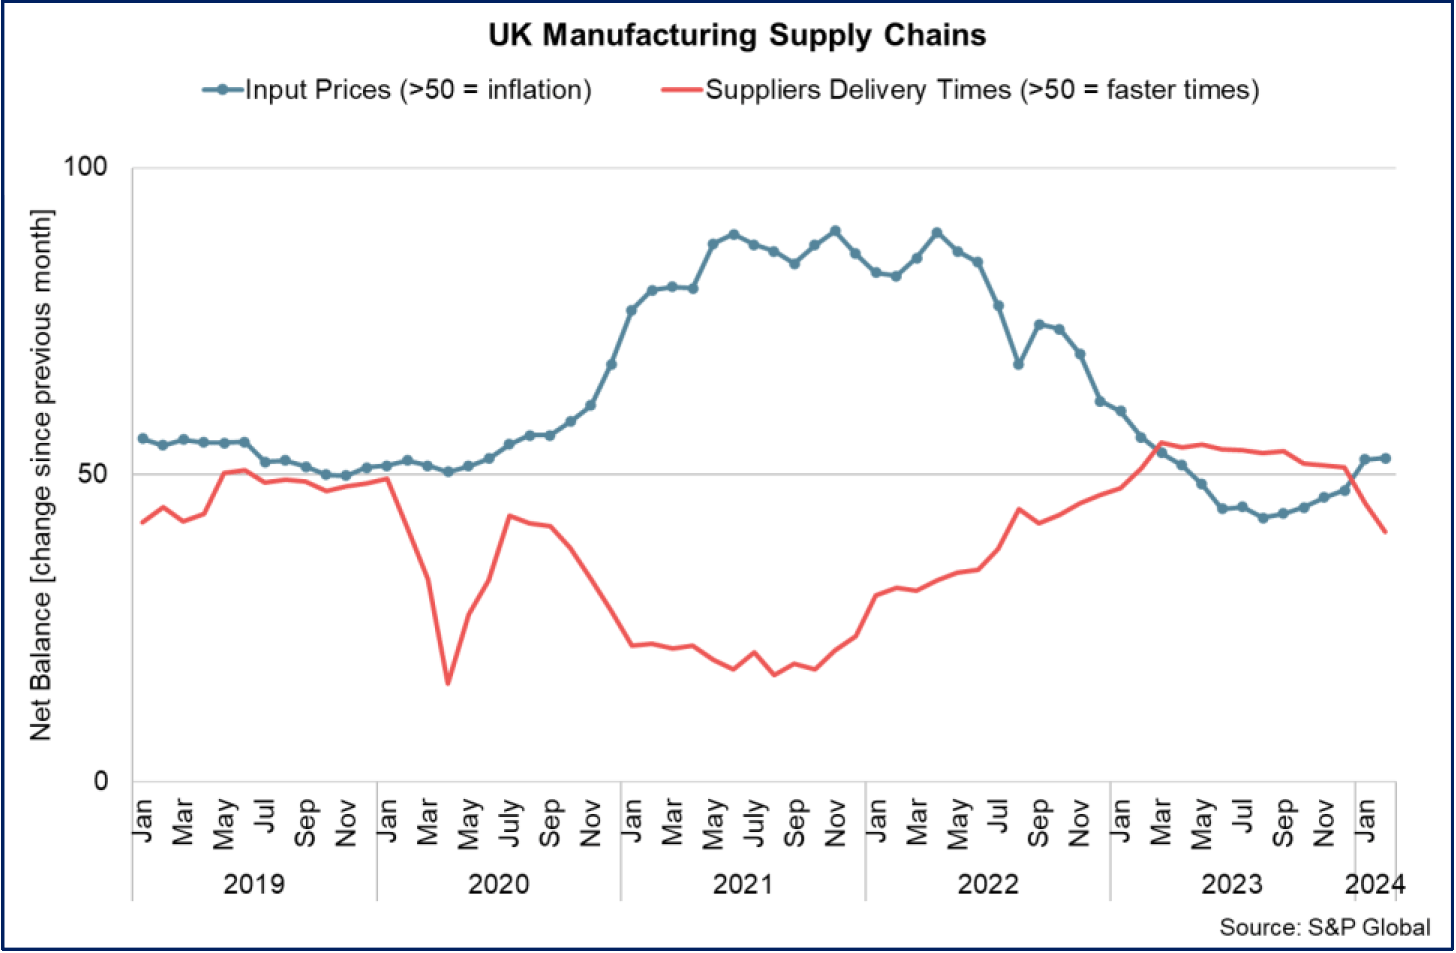 manufacturing supplier delivery times have lengthened in January and February 2024 while input costs have also increased